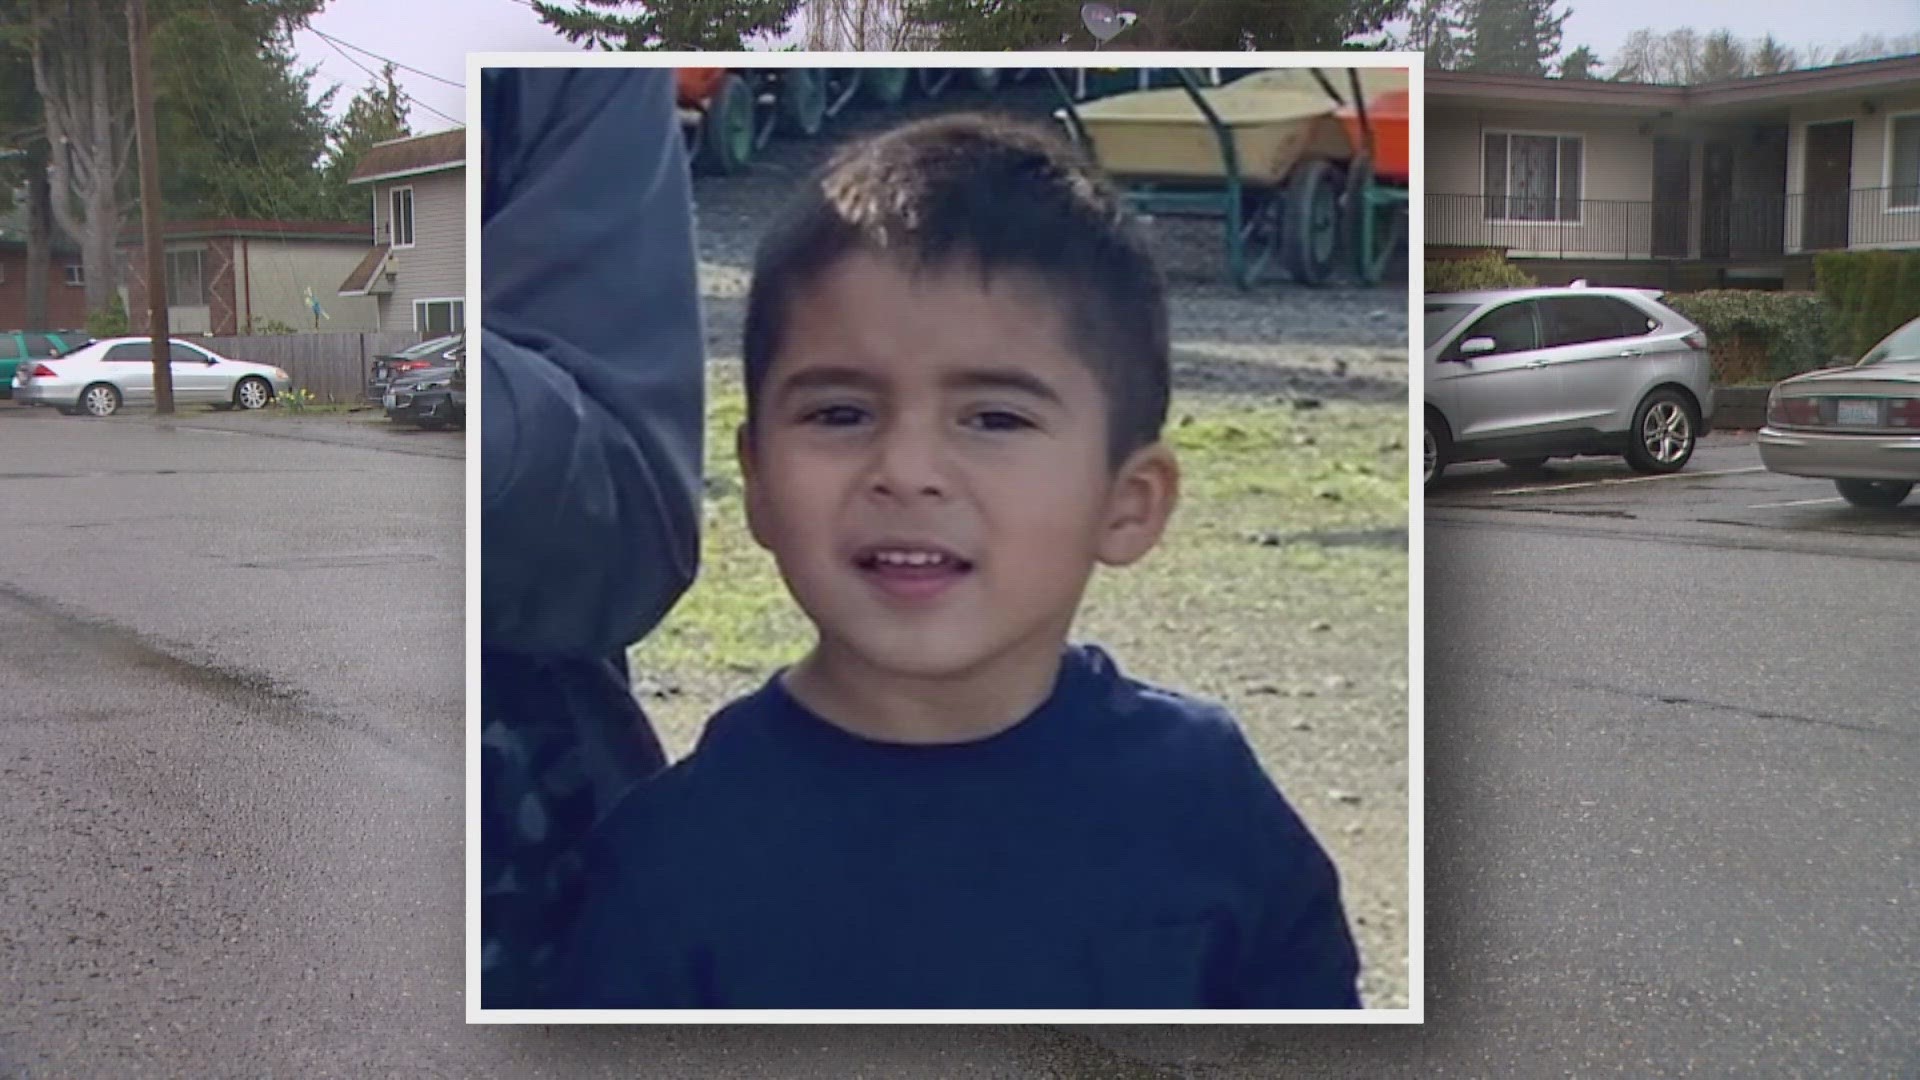 At the time, 4-year-old Ariel Garcia's case did not qualify for an AMBER Alert because it was not considered an abduction, Washington State Patrol says